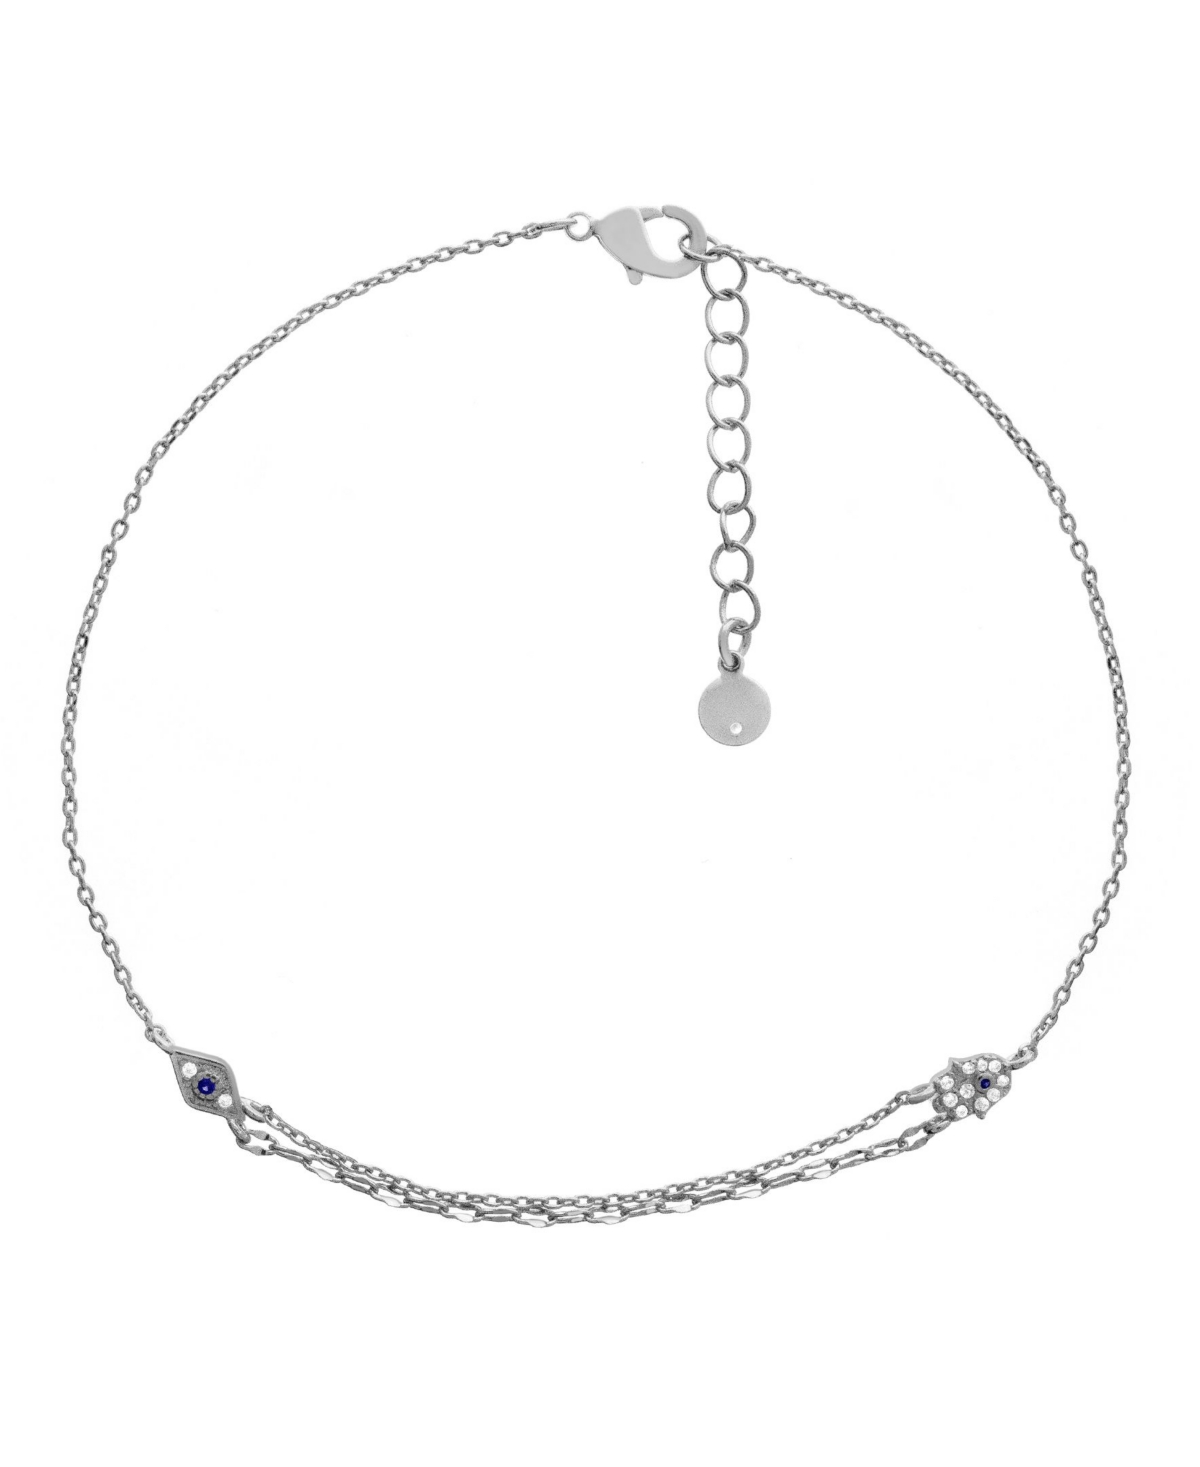 Hamsa and Evil Eye Anklet in Silver Plate - Silver